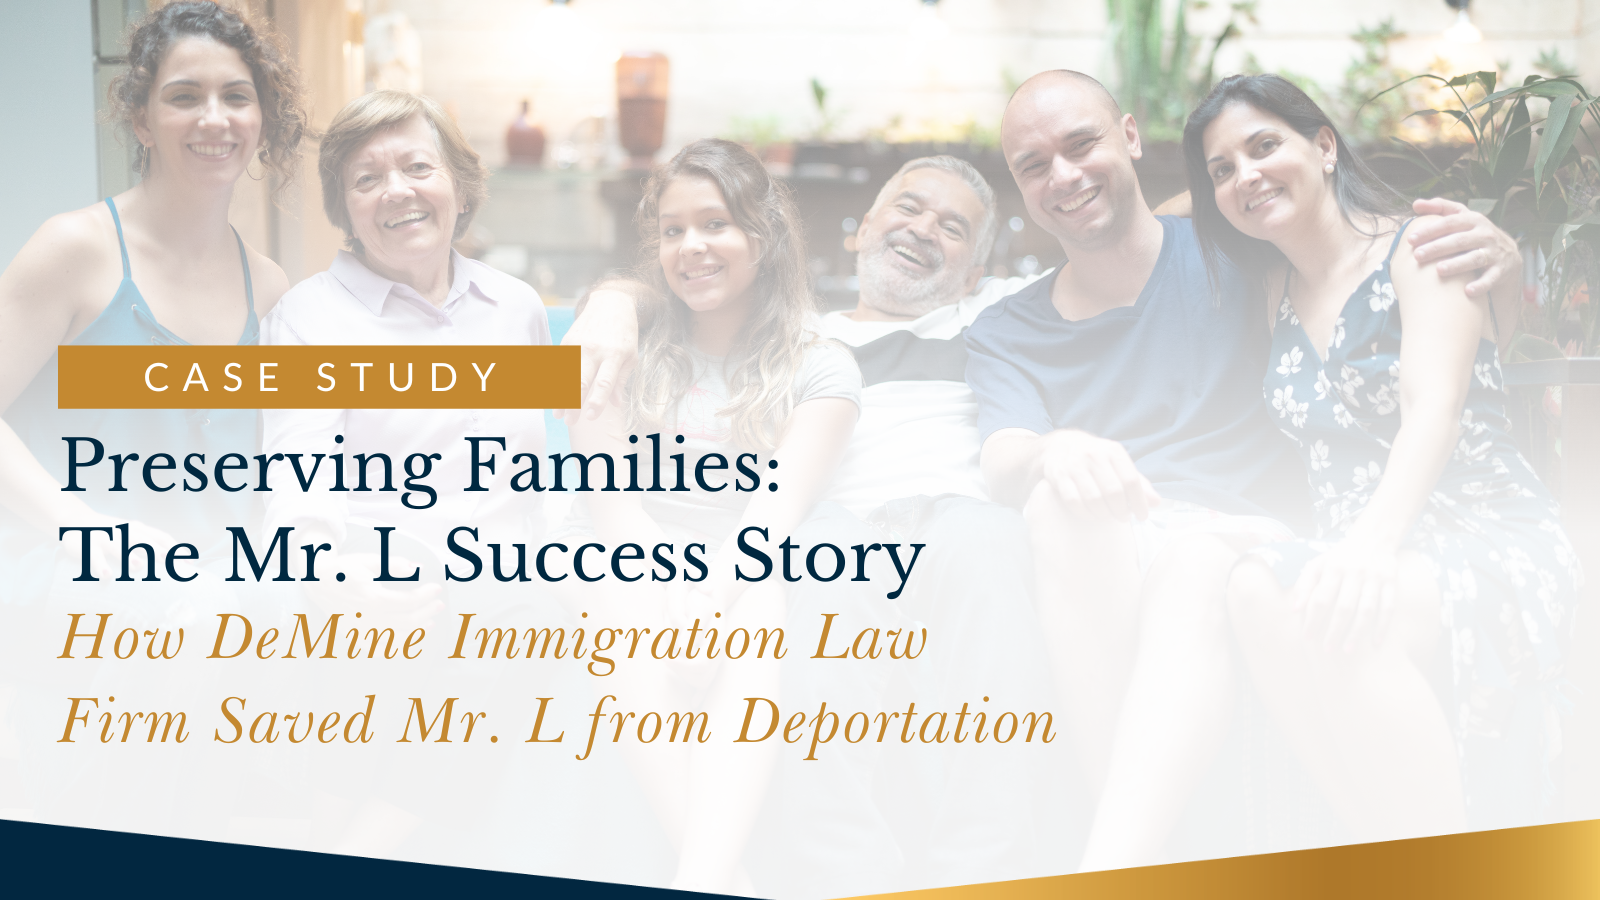 Victory for Families: How We Halted Deportation with a Stay of Removal